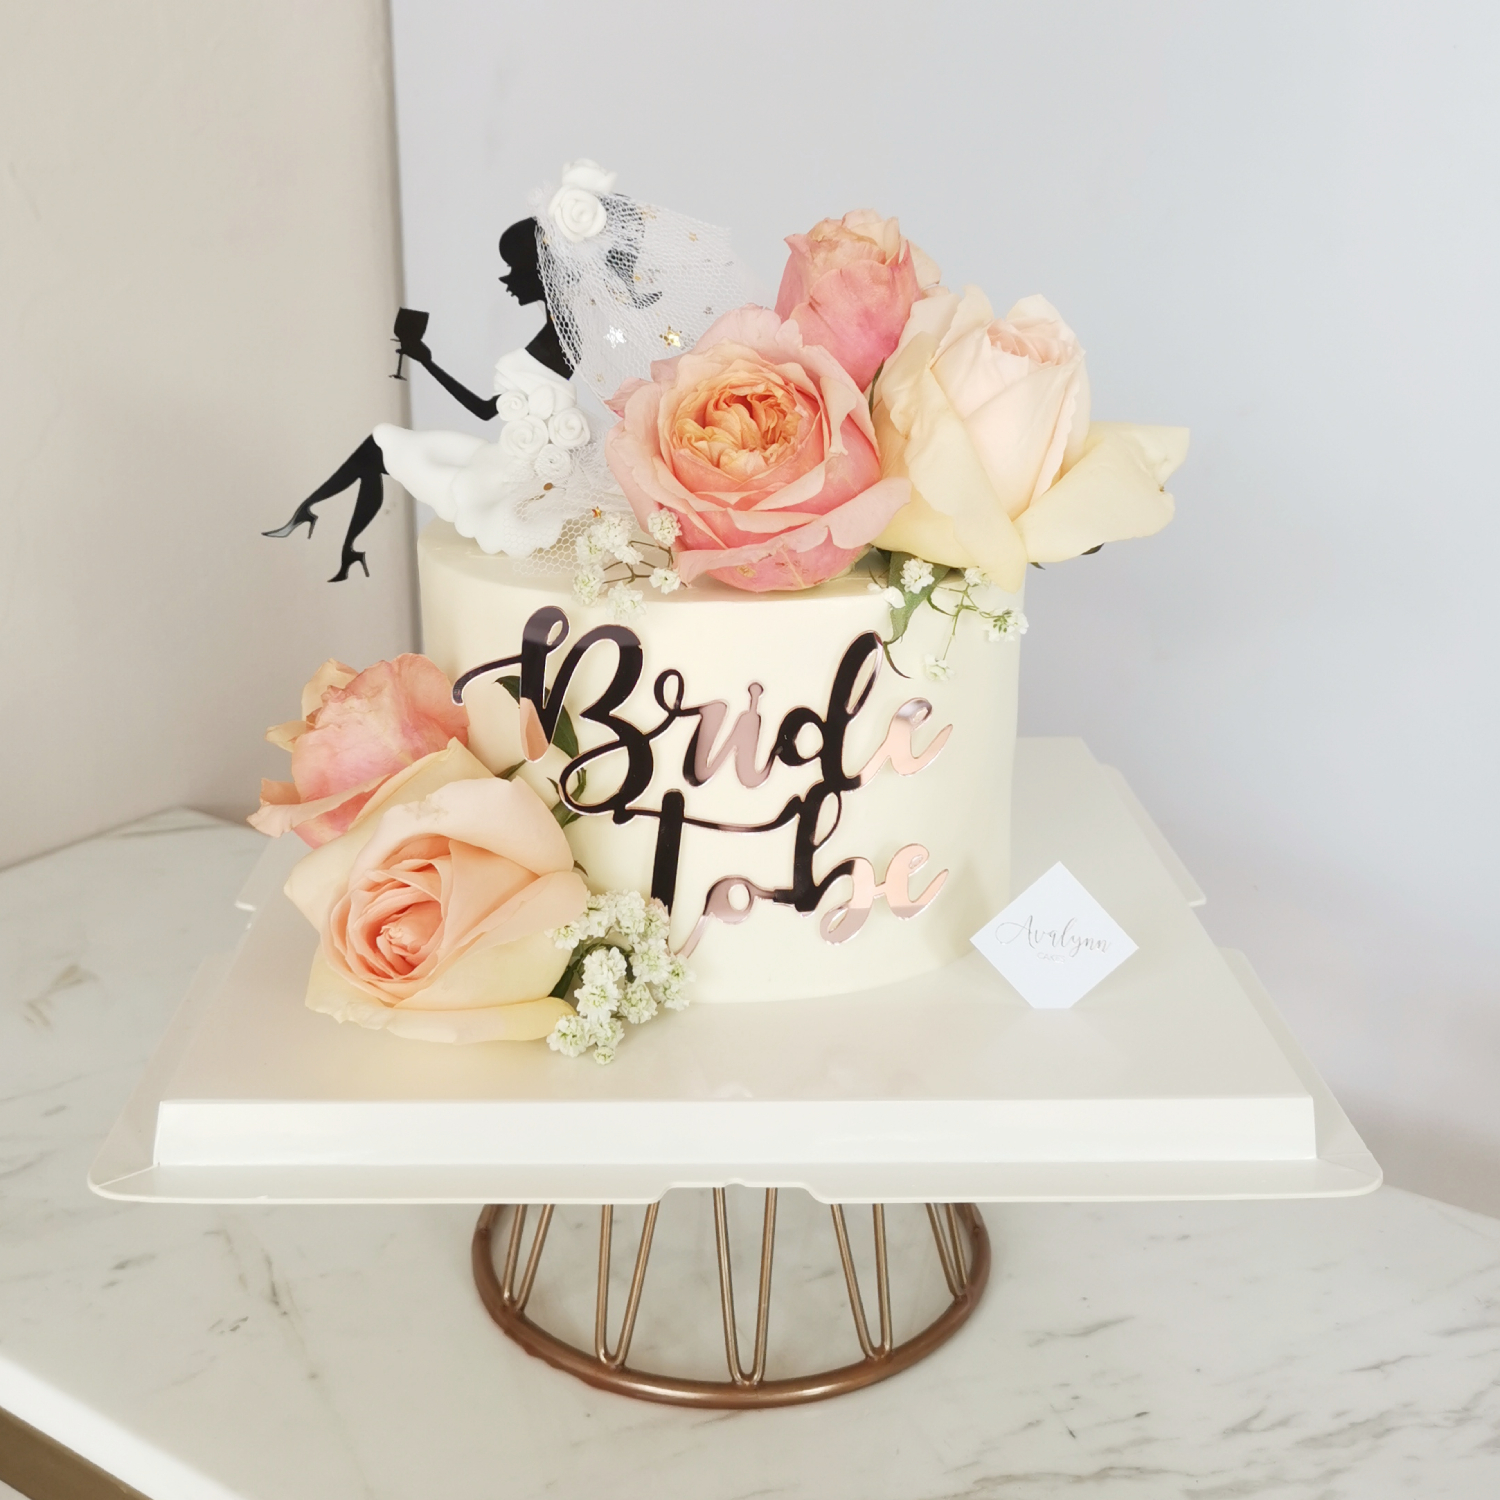 Elegant Bride to Be Cake for Your Bridal Shower | CreamOne